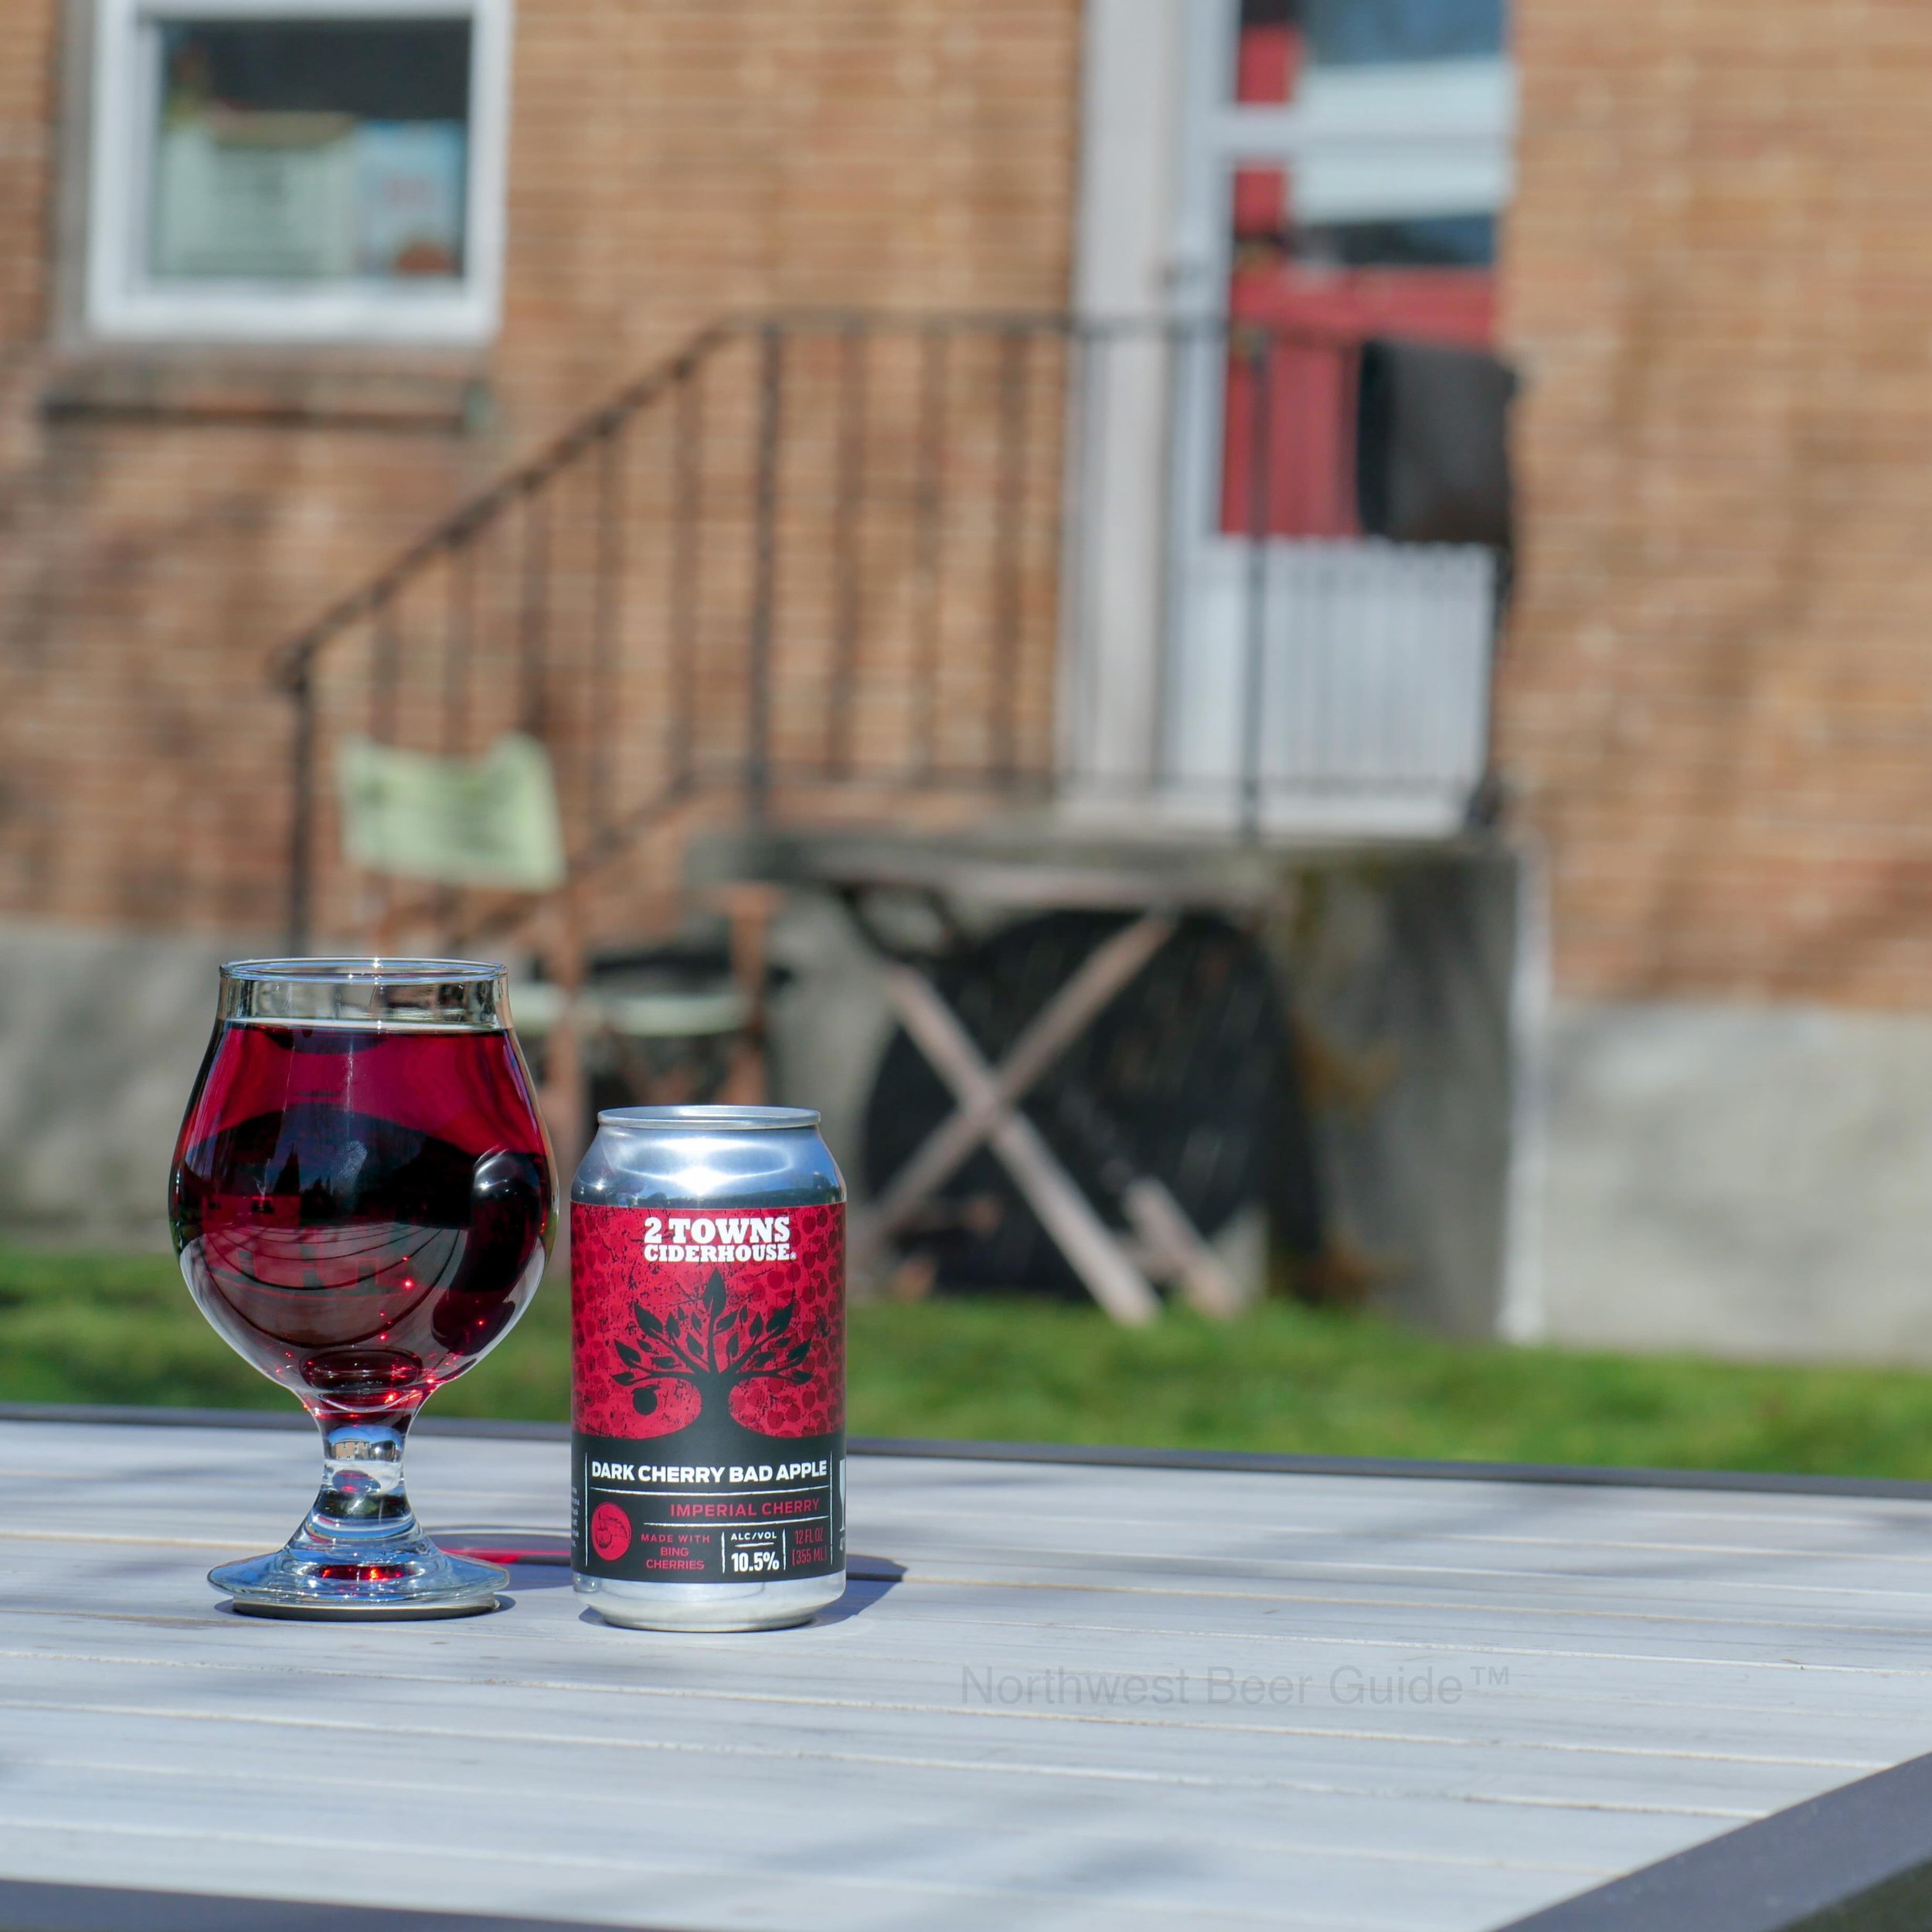 With cherry-picking season being weeks-away, @2townscider has the perfect cider to pair with your day. The latest in their Bad Apple series, Dark Cherry Bad Apple, starts with an apple base, before adding juiced cherries, honey, and aging in white oa